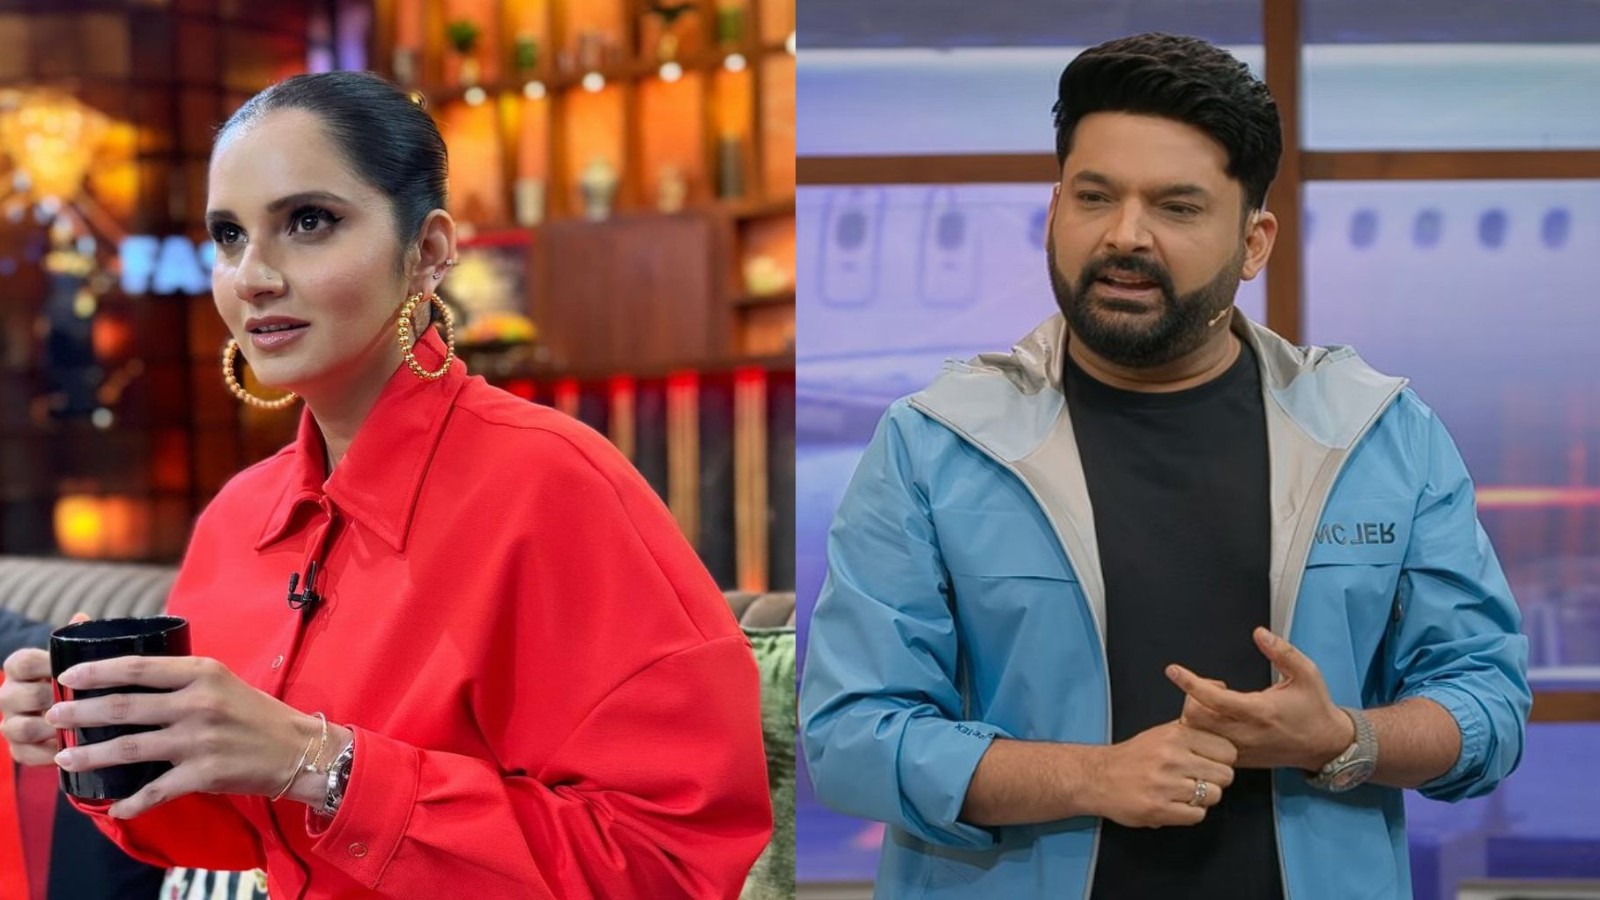 The Great Indian Kapil Show: Sania Mirza gives peek at her appearance on show in recent social media post | PINKVILLA